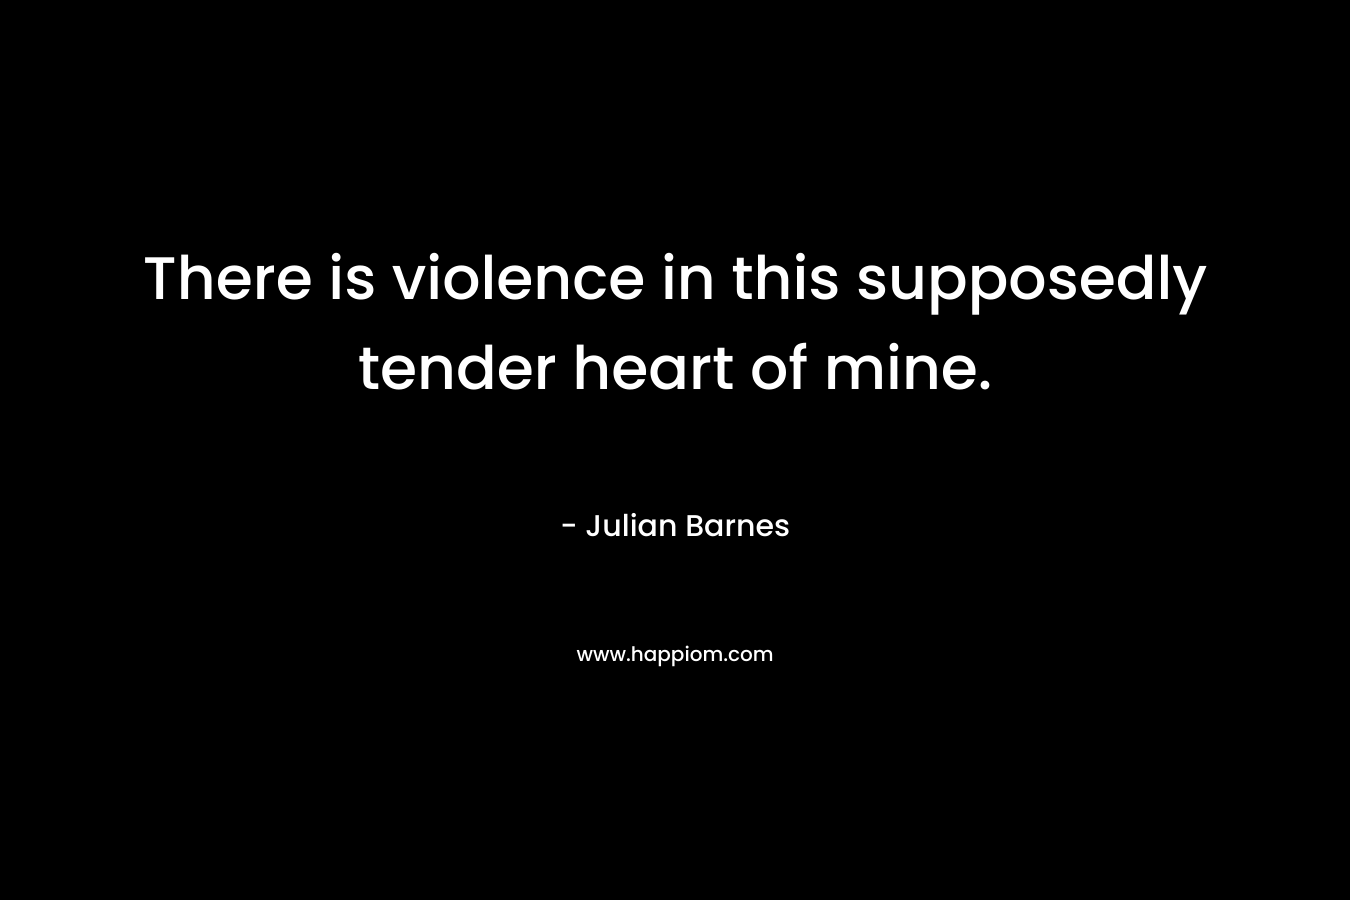 There is violence in this supposedly tender heart of mine. – Julian Barnes